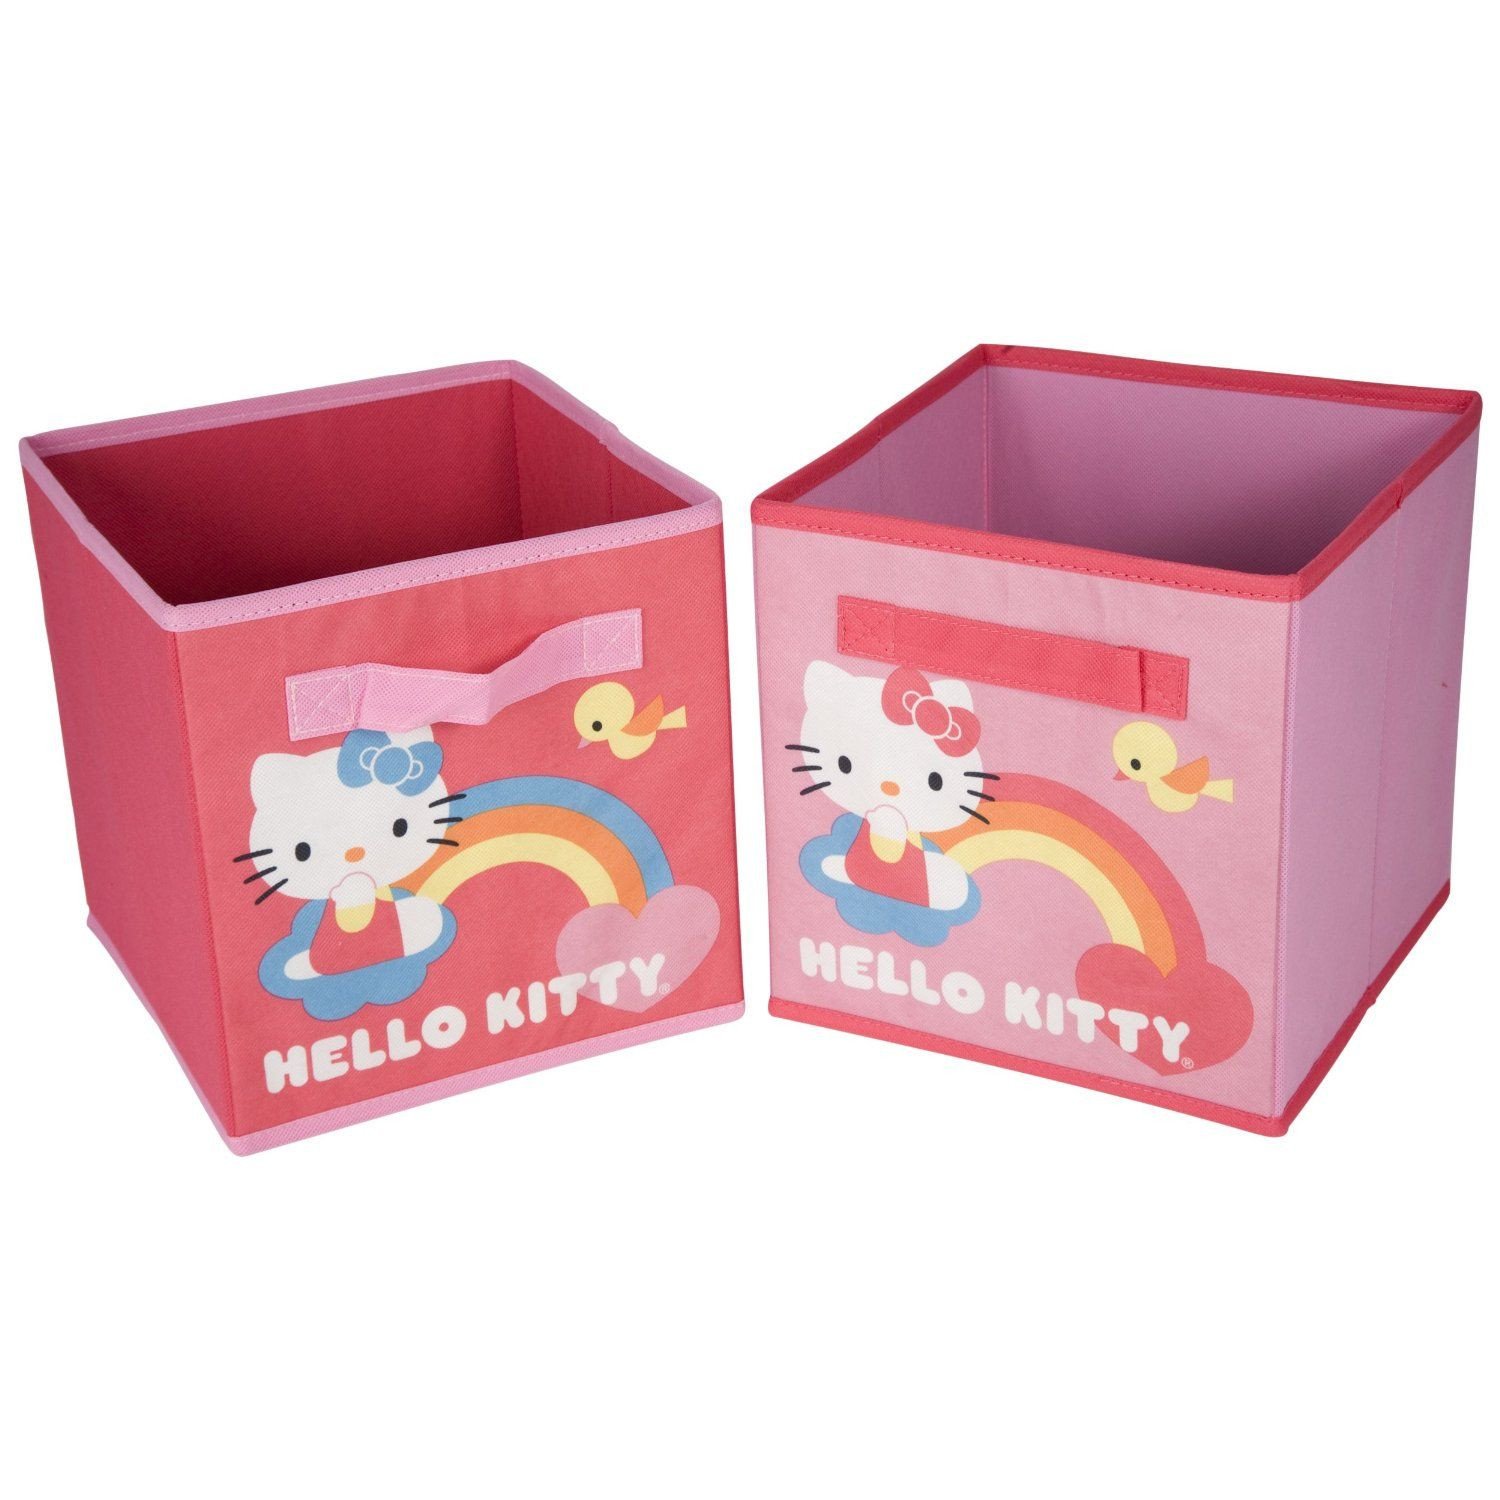 Hello Kitty Bedroom In A Box Inspirational Amazon Set Of 2 Storage Bins Hello Kitty Two Pack